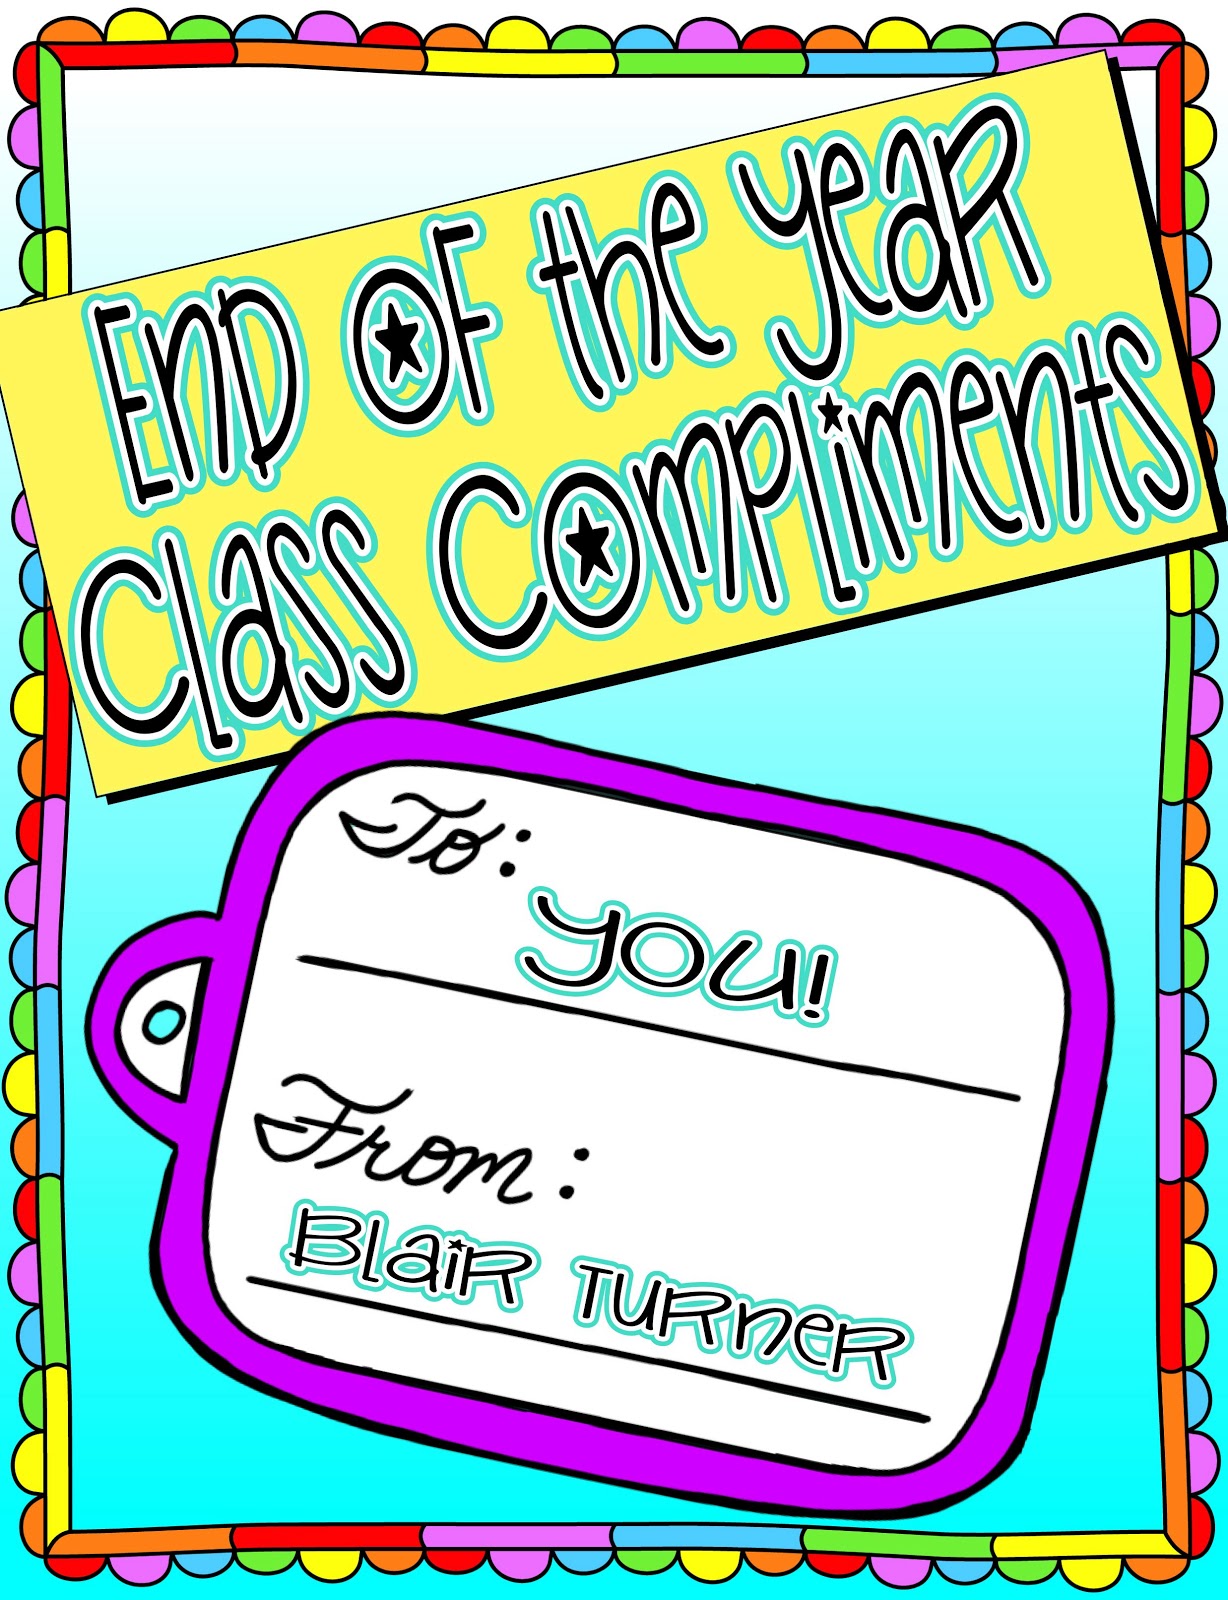 End Of School Year Clip Art - ClipArt Best